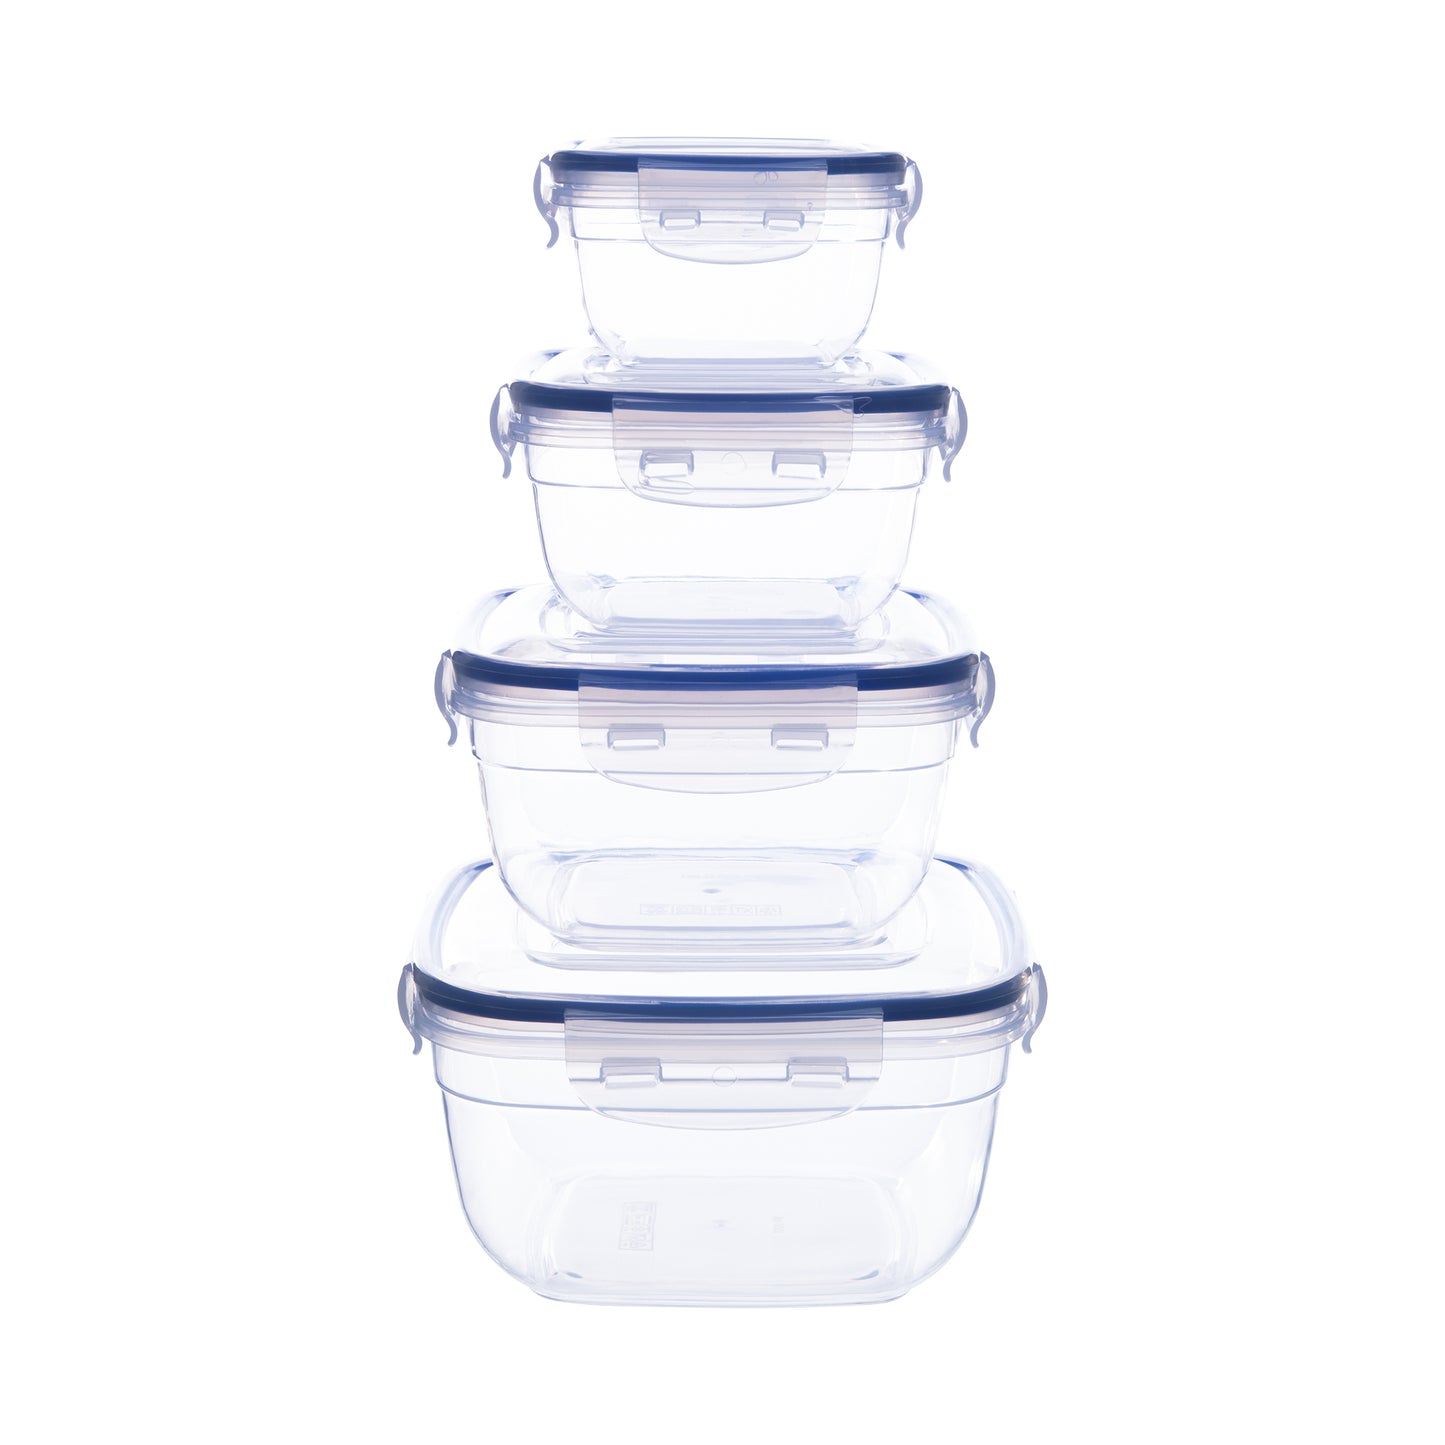 Superio Food Storage Containers, Airtight Leak-Proof Meal Prep Square Containers, Set of 4 Multiple sizes.